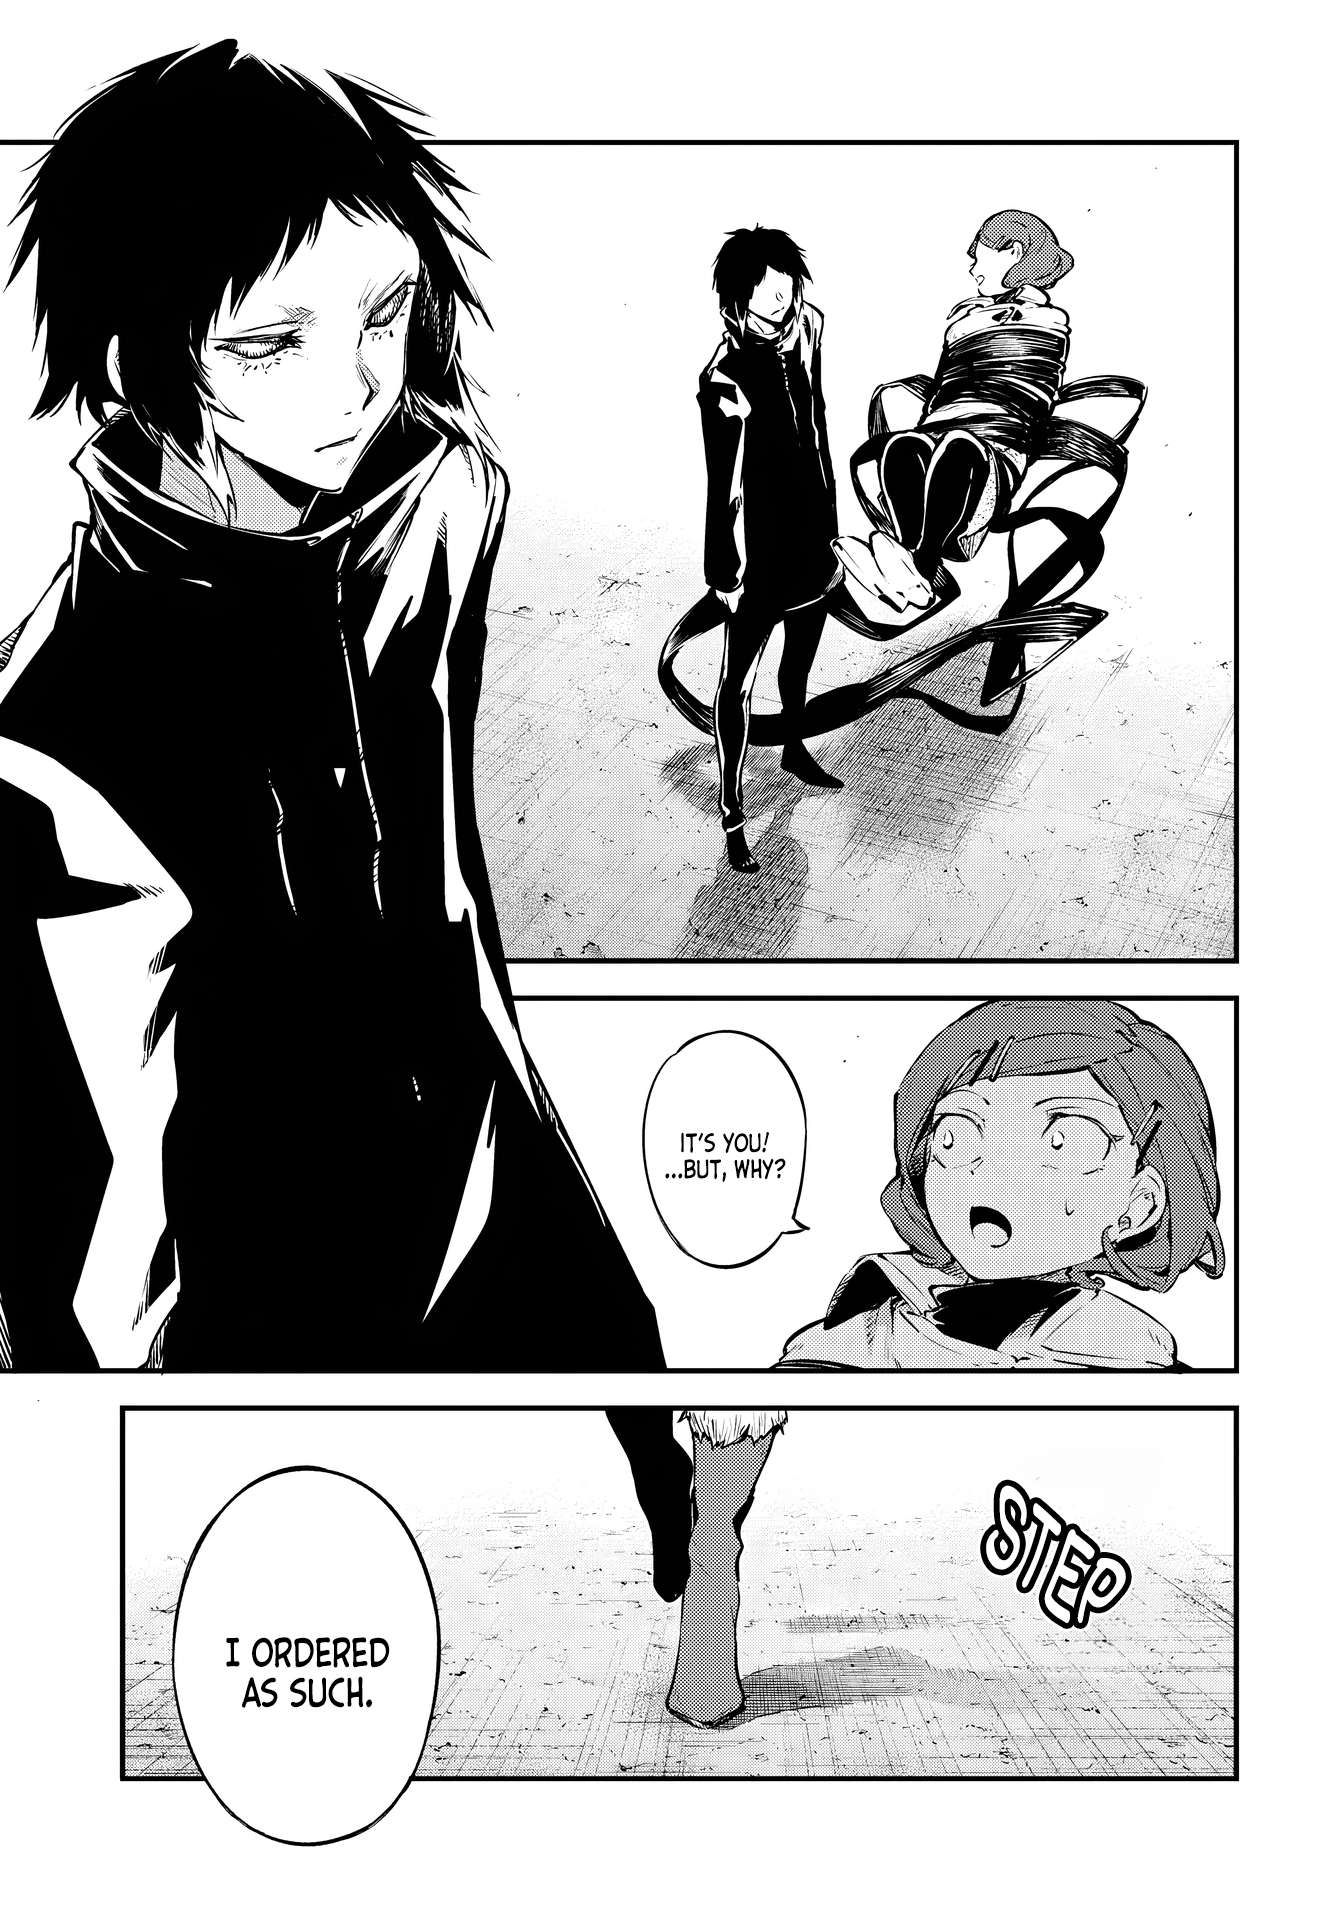 Bungo Stray Dogs chapter 111.5 page 4